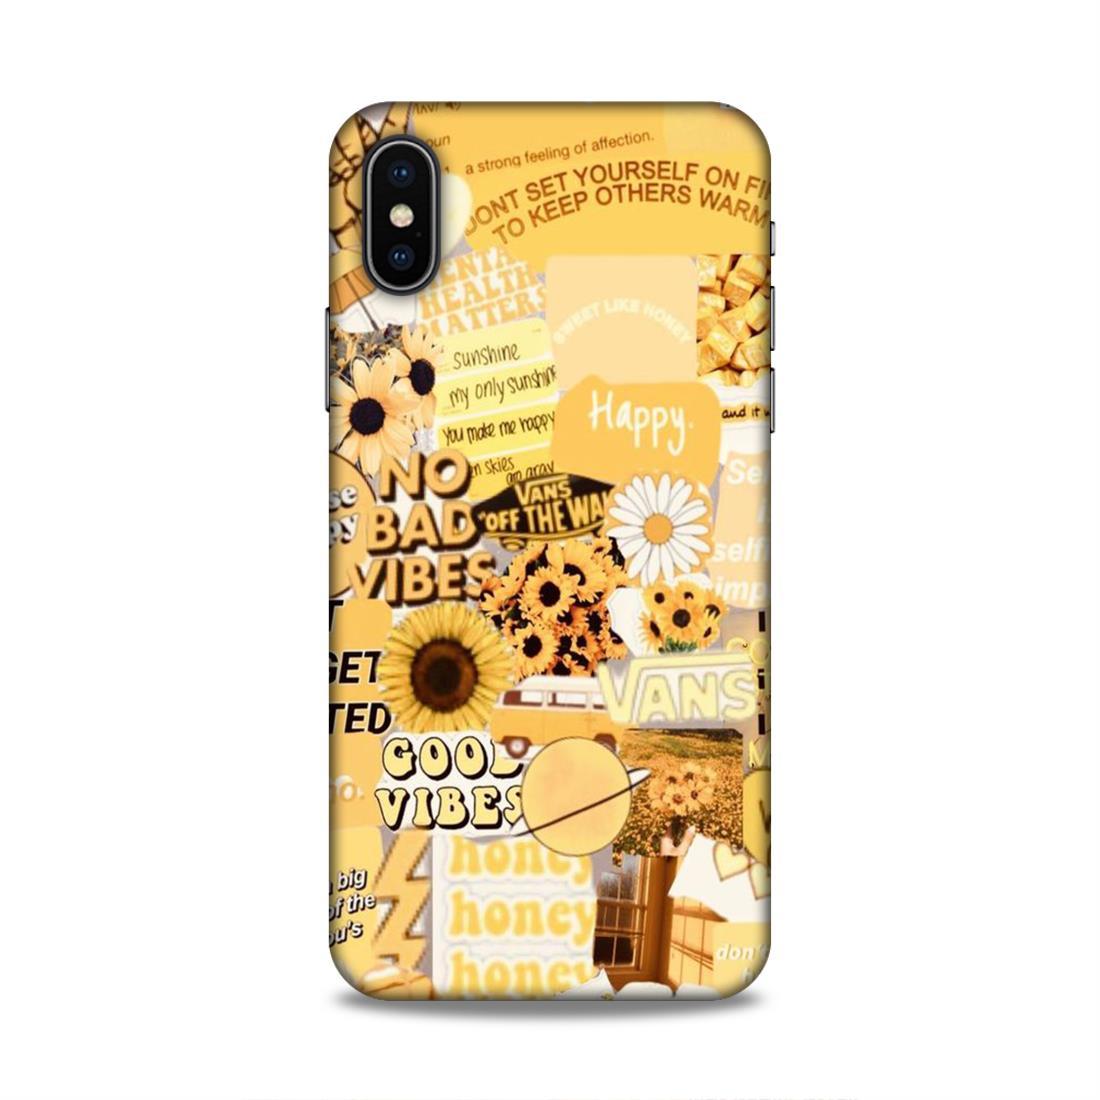 No Bad Vibes iPhone X Phone Cover Case